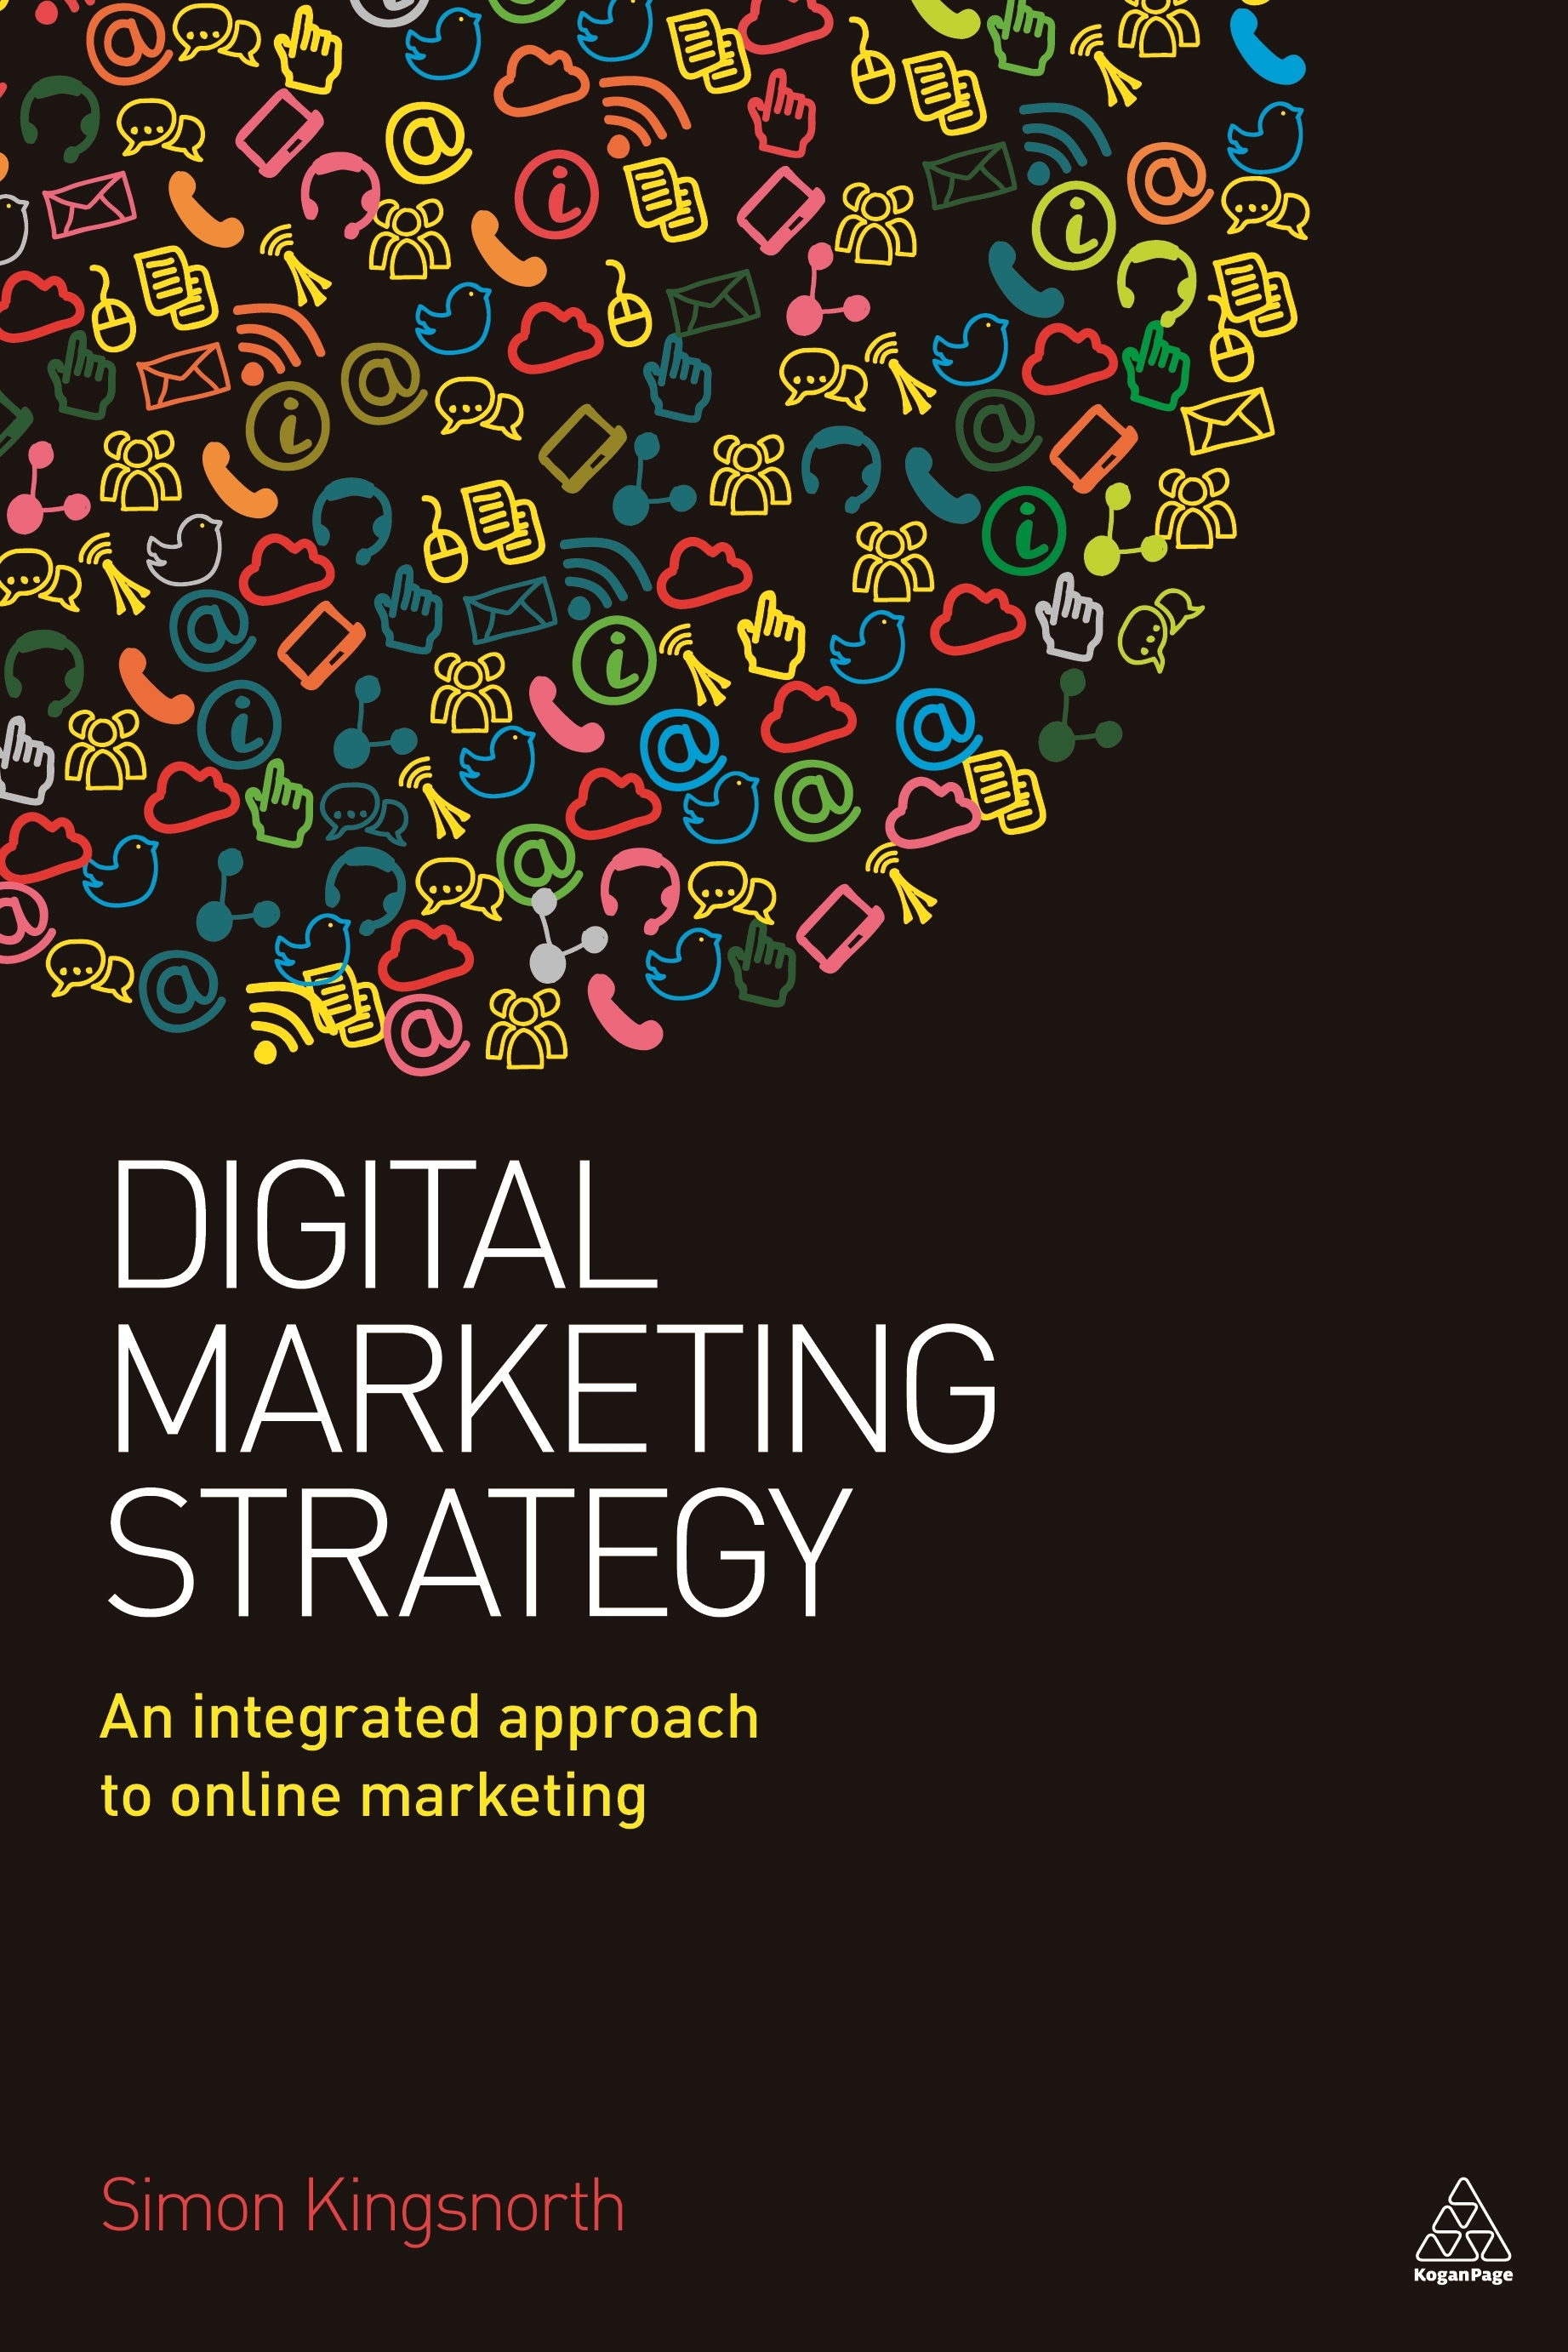 Digital Marketing Strategy: An Integrated Approach to Online Marketing 3rd Edition by Simon Kingsnorth (Author)